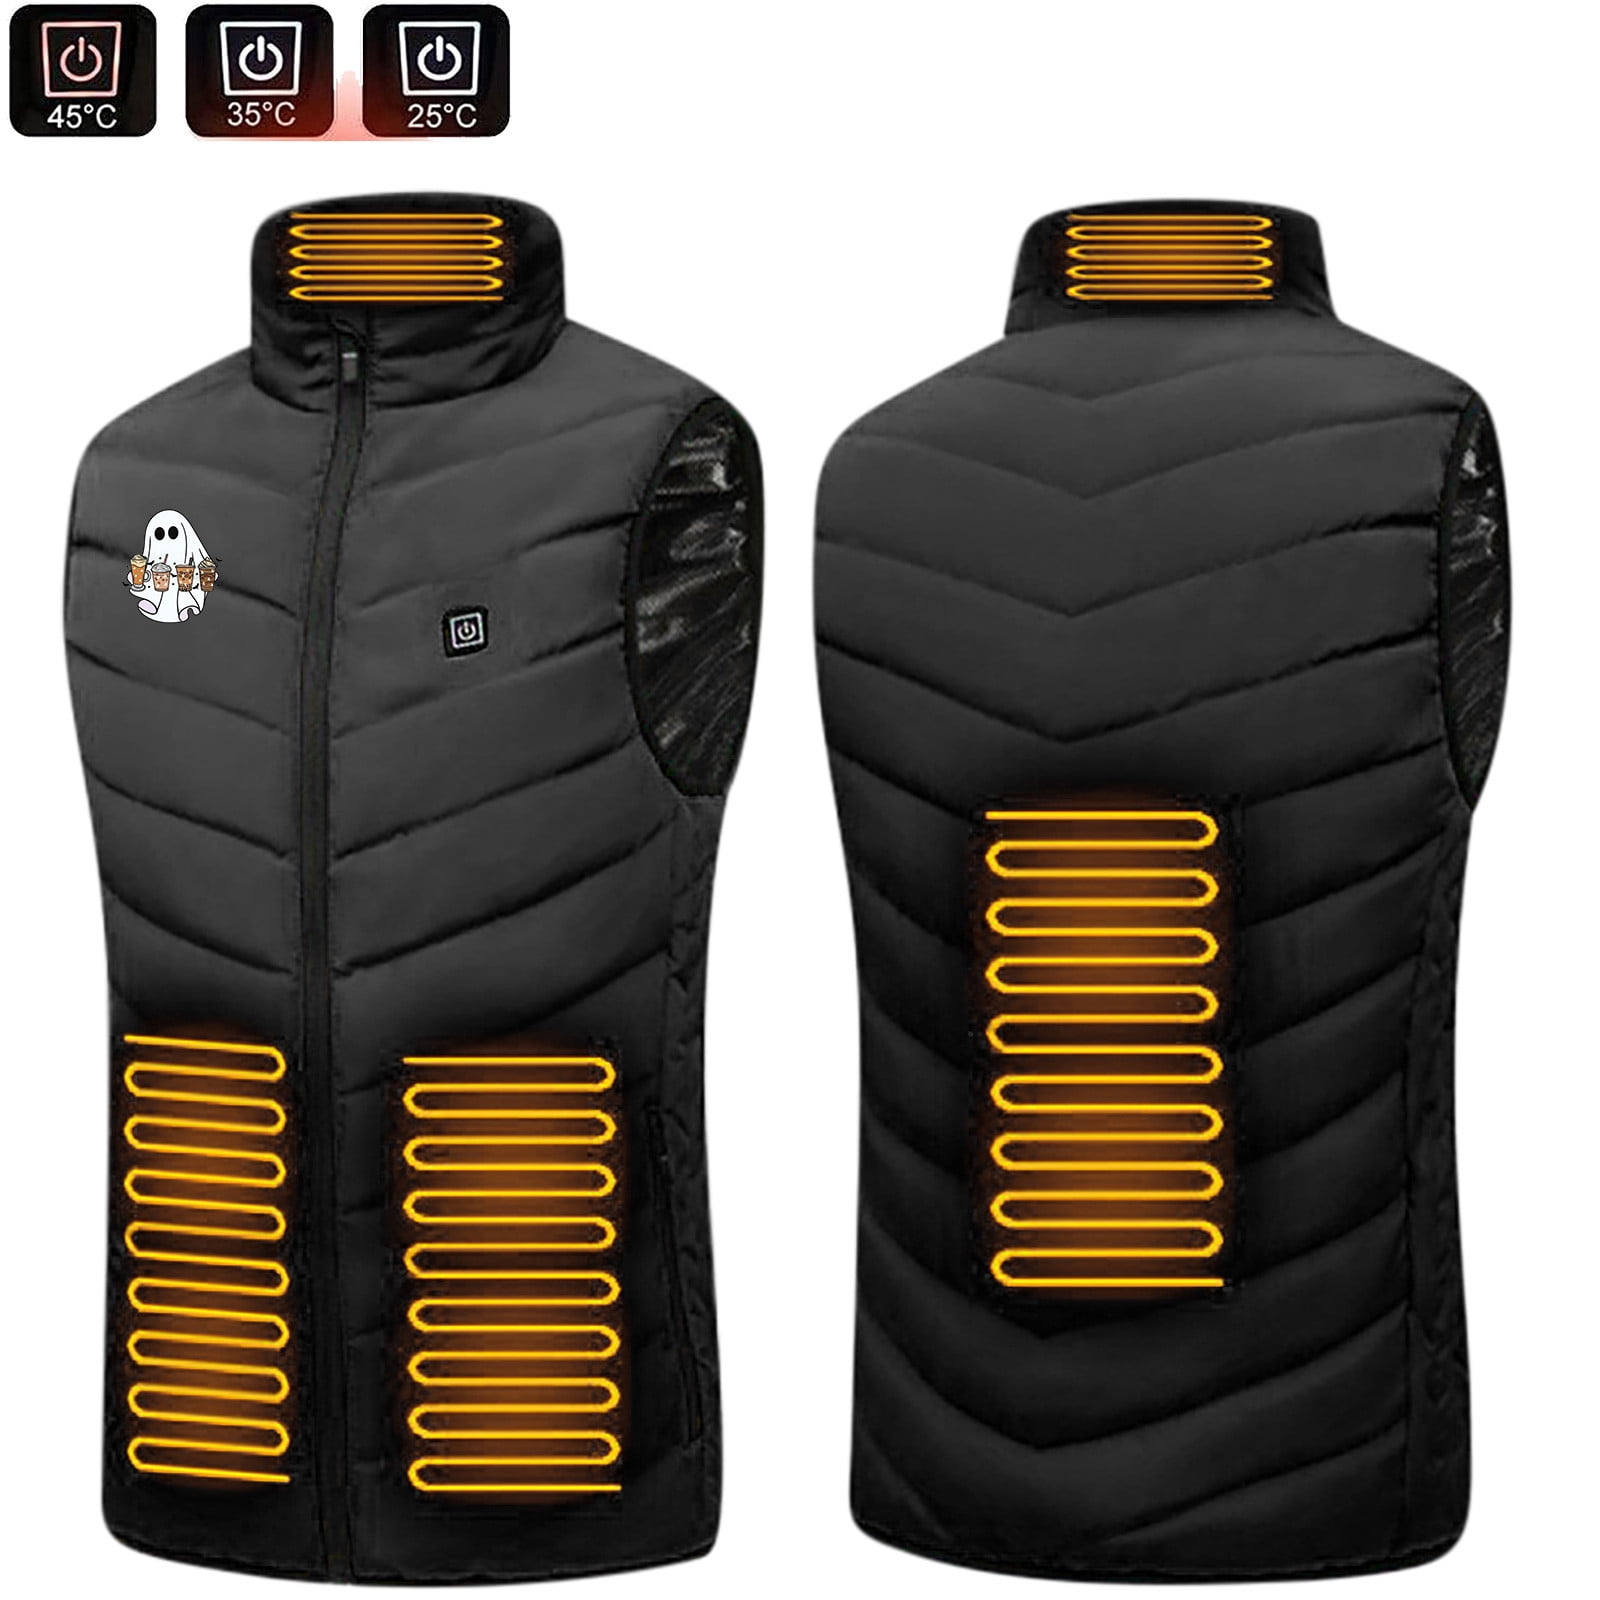 Meichang Men Women Heated Jackets USB Charging Heating for 8 Hours Heated  Jacket for Outdoor Work Fishing Battery Pack Not Included 